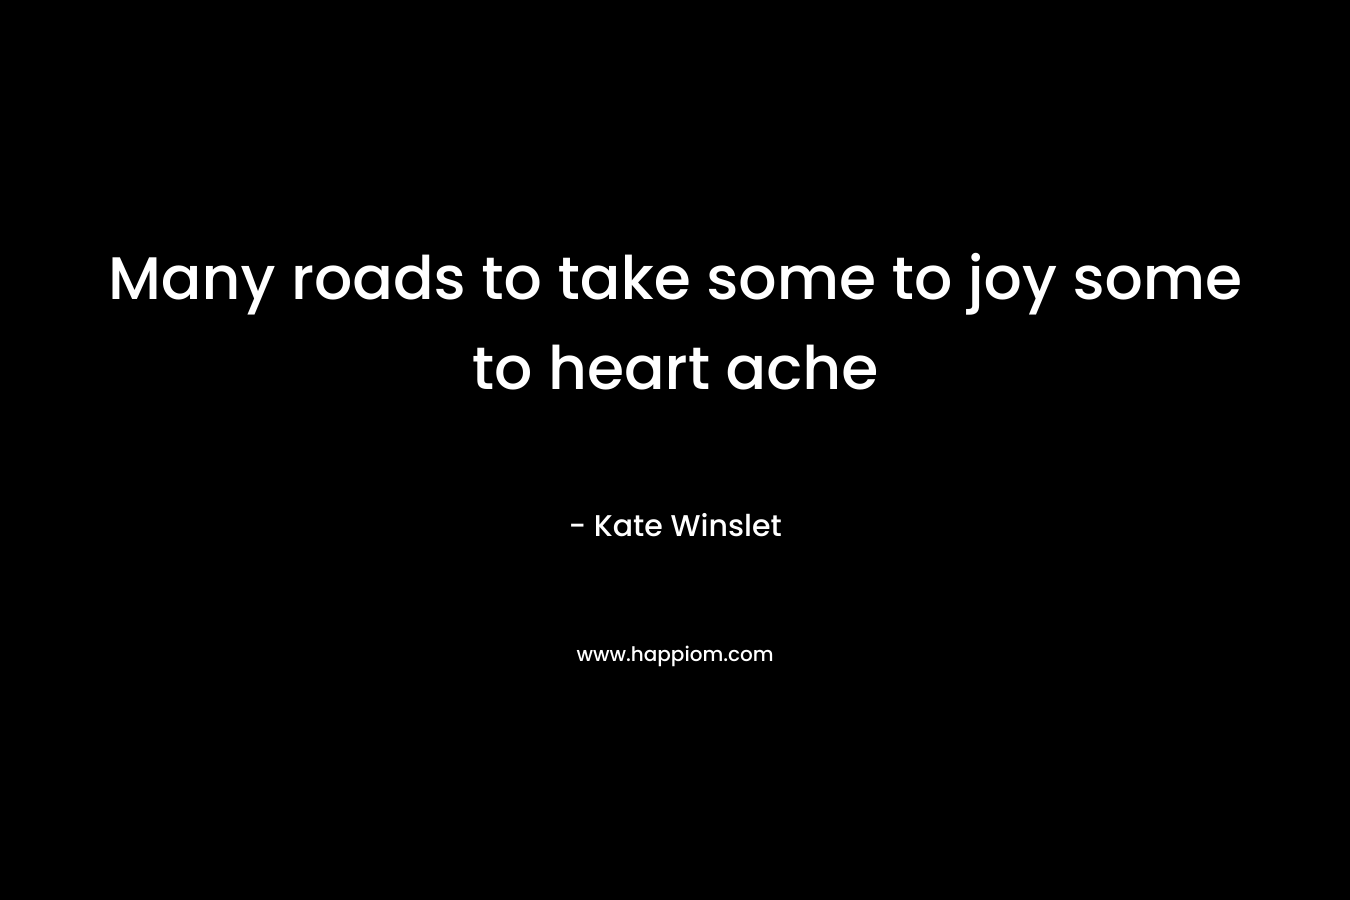 Many roads to take some to joy some to heart ache